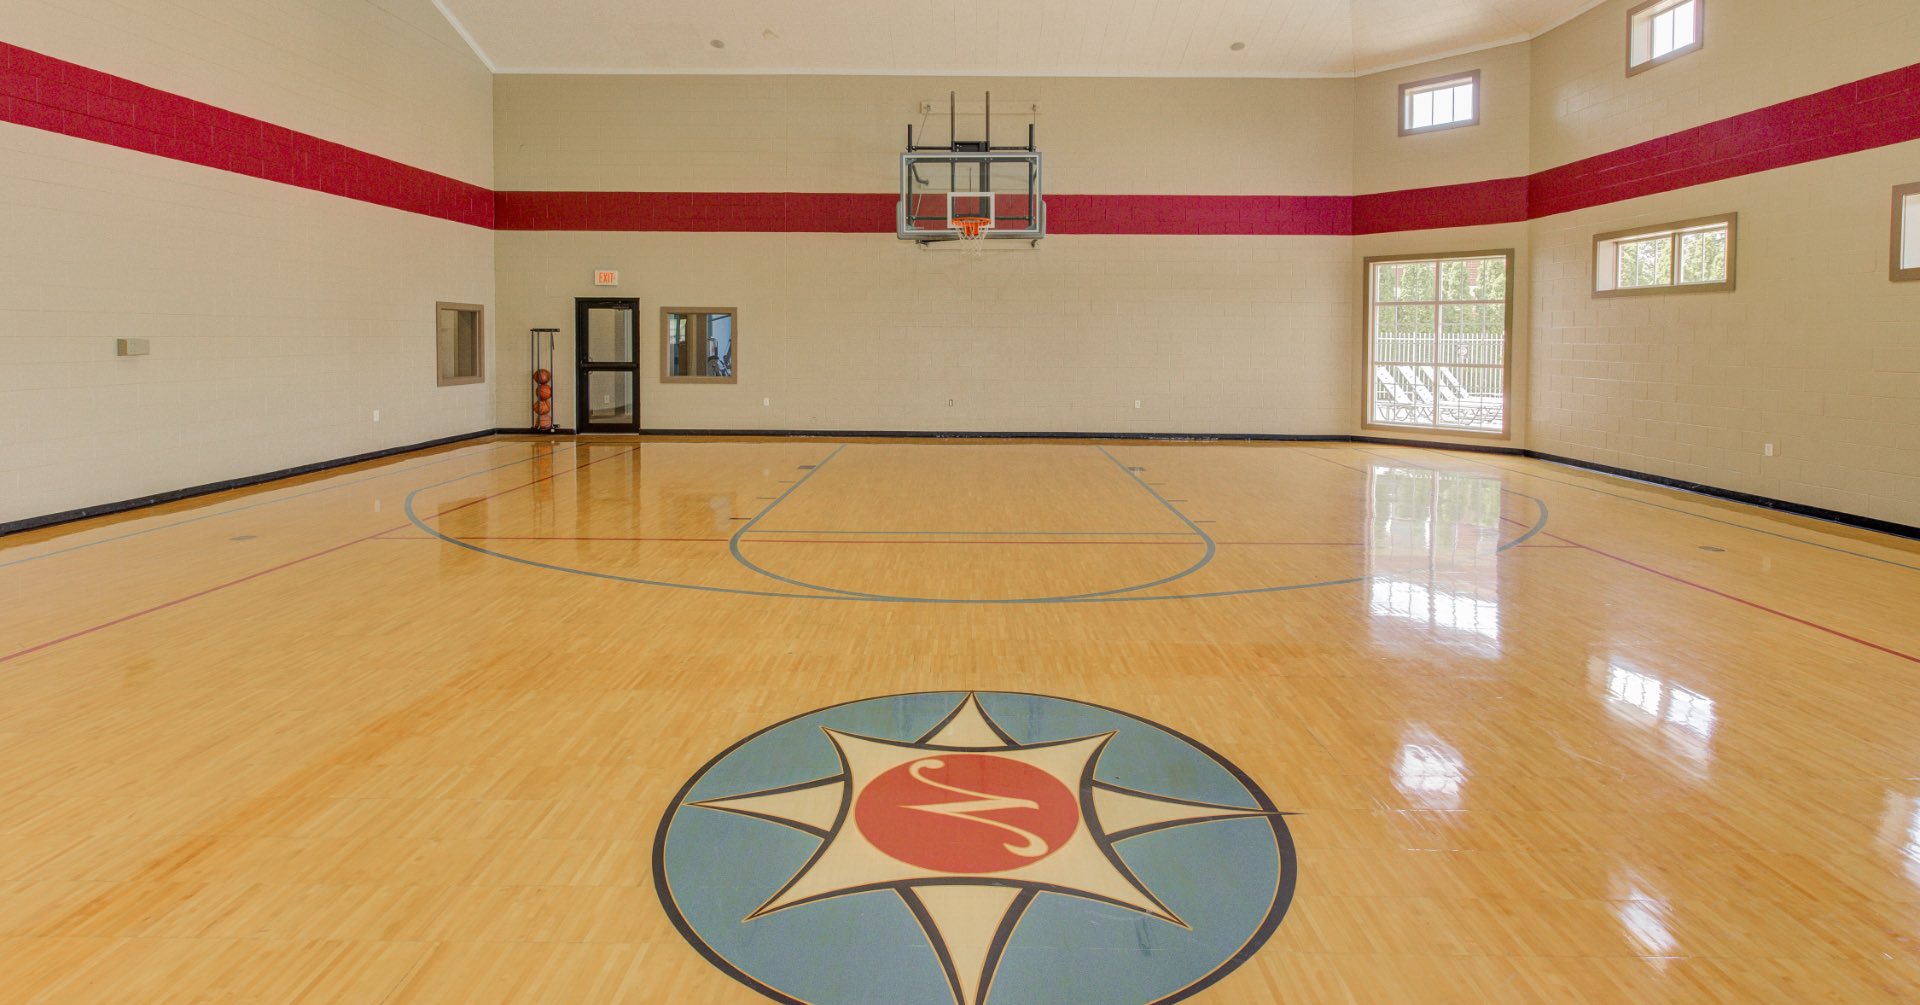 North Haven Basketball Court